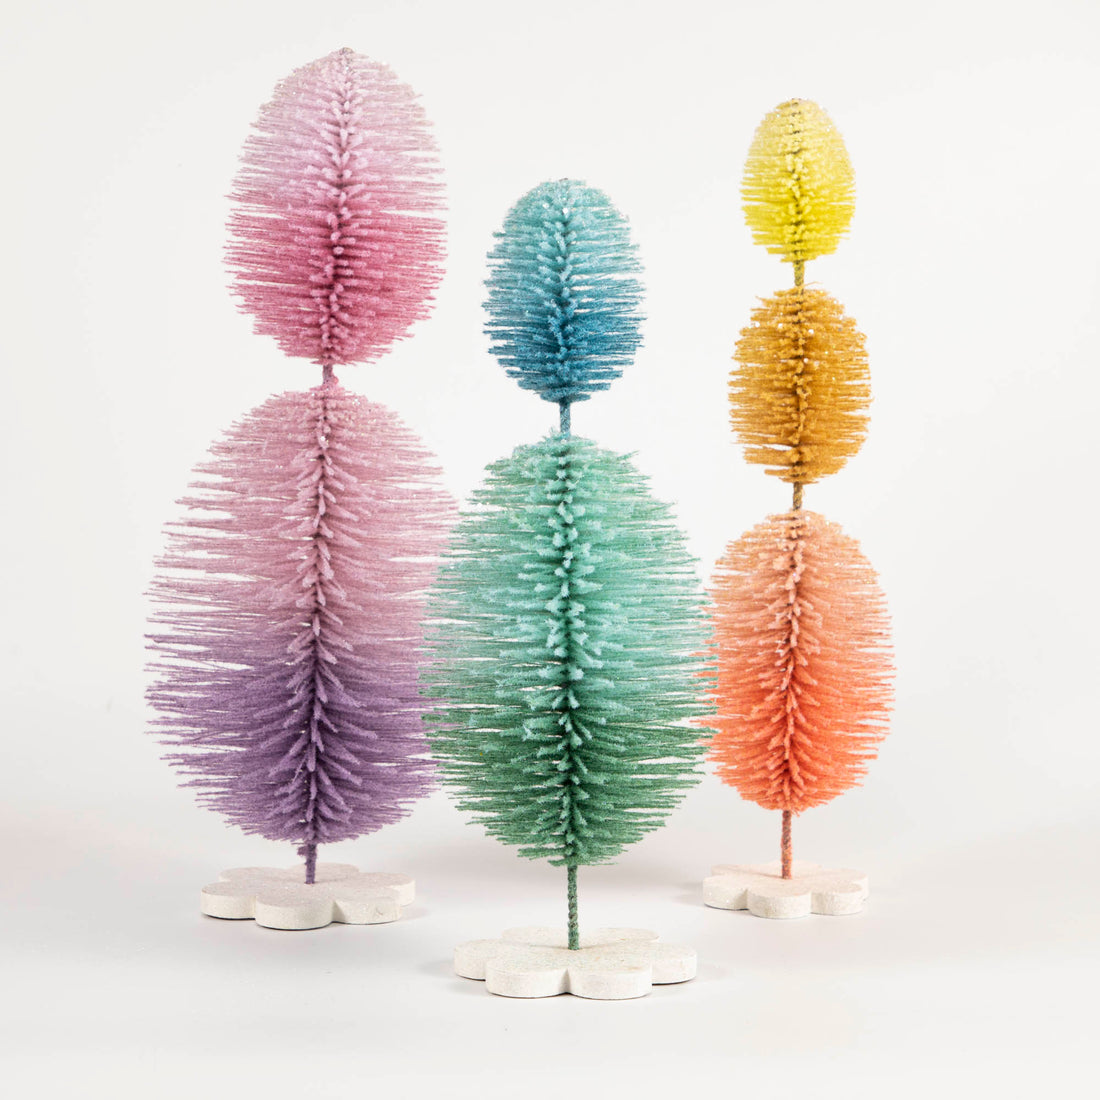 Three Glitterville Sisal Topiary Trees, reminiscent of spring and Easter celebration, on a white background.